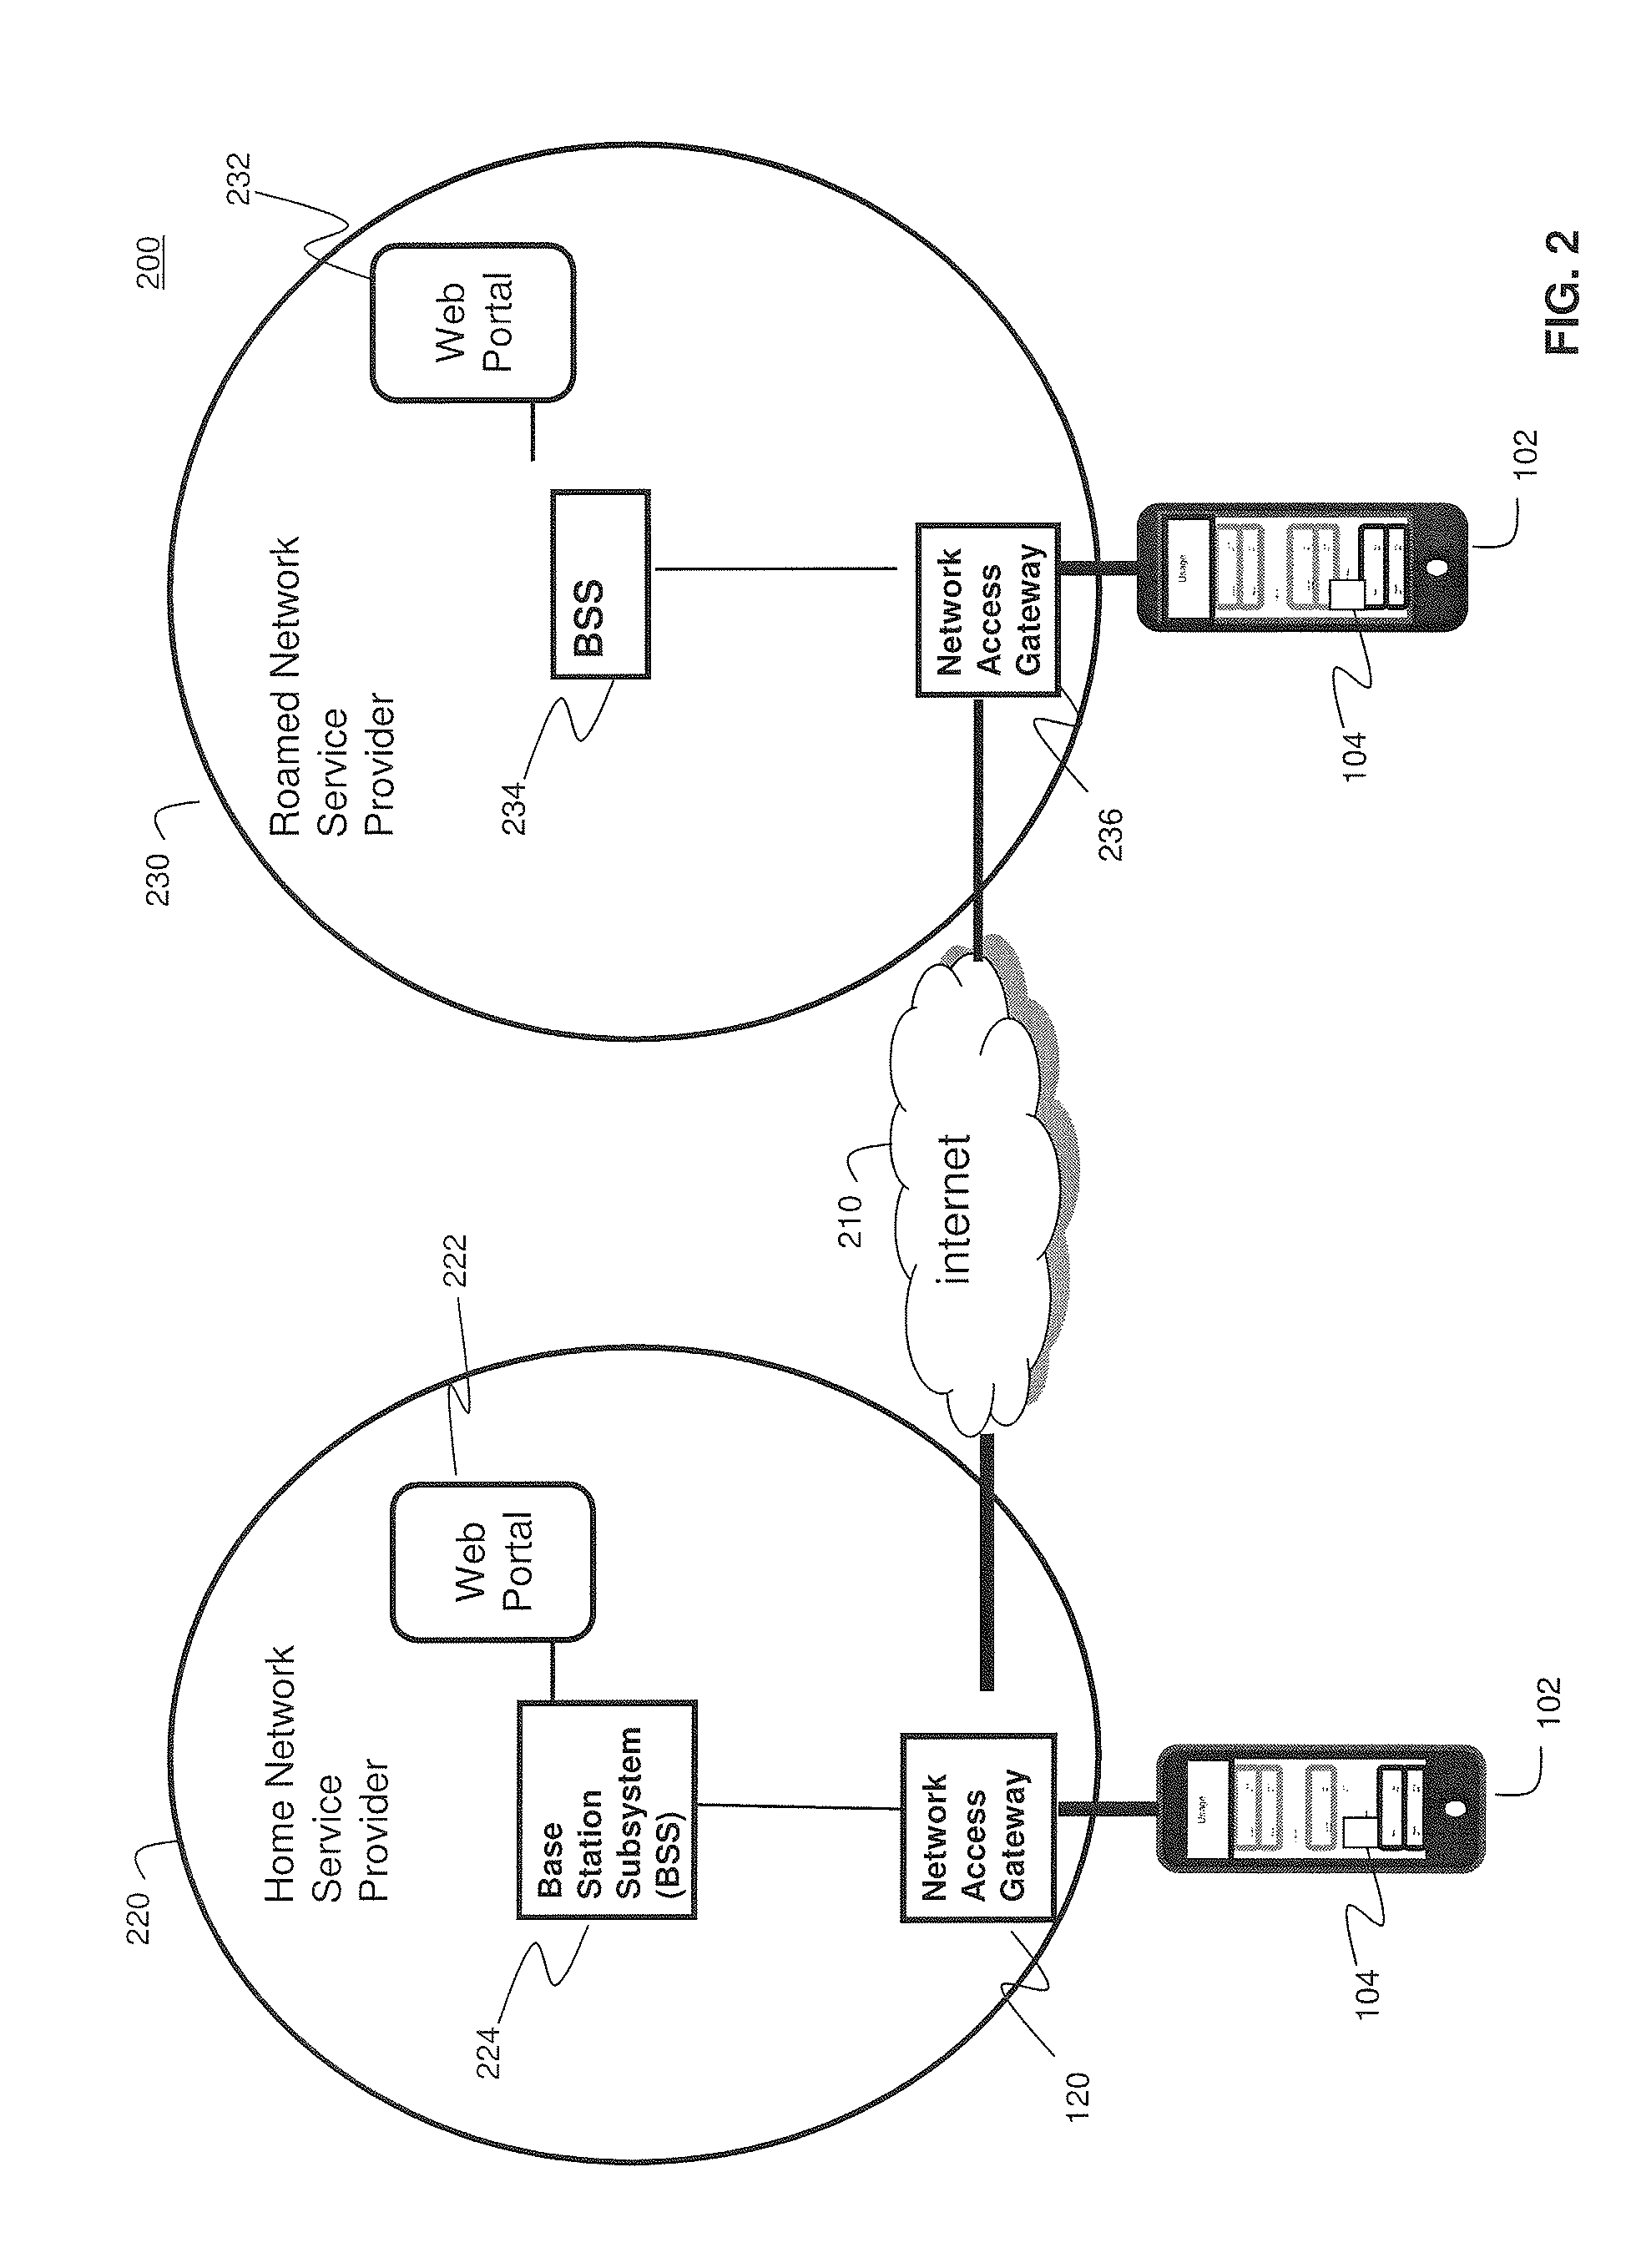 System and Methods for User-Centric Mobile Device-Based Data Communications Cost Monitoring and Control